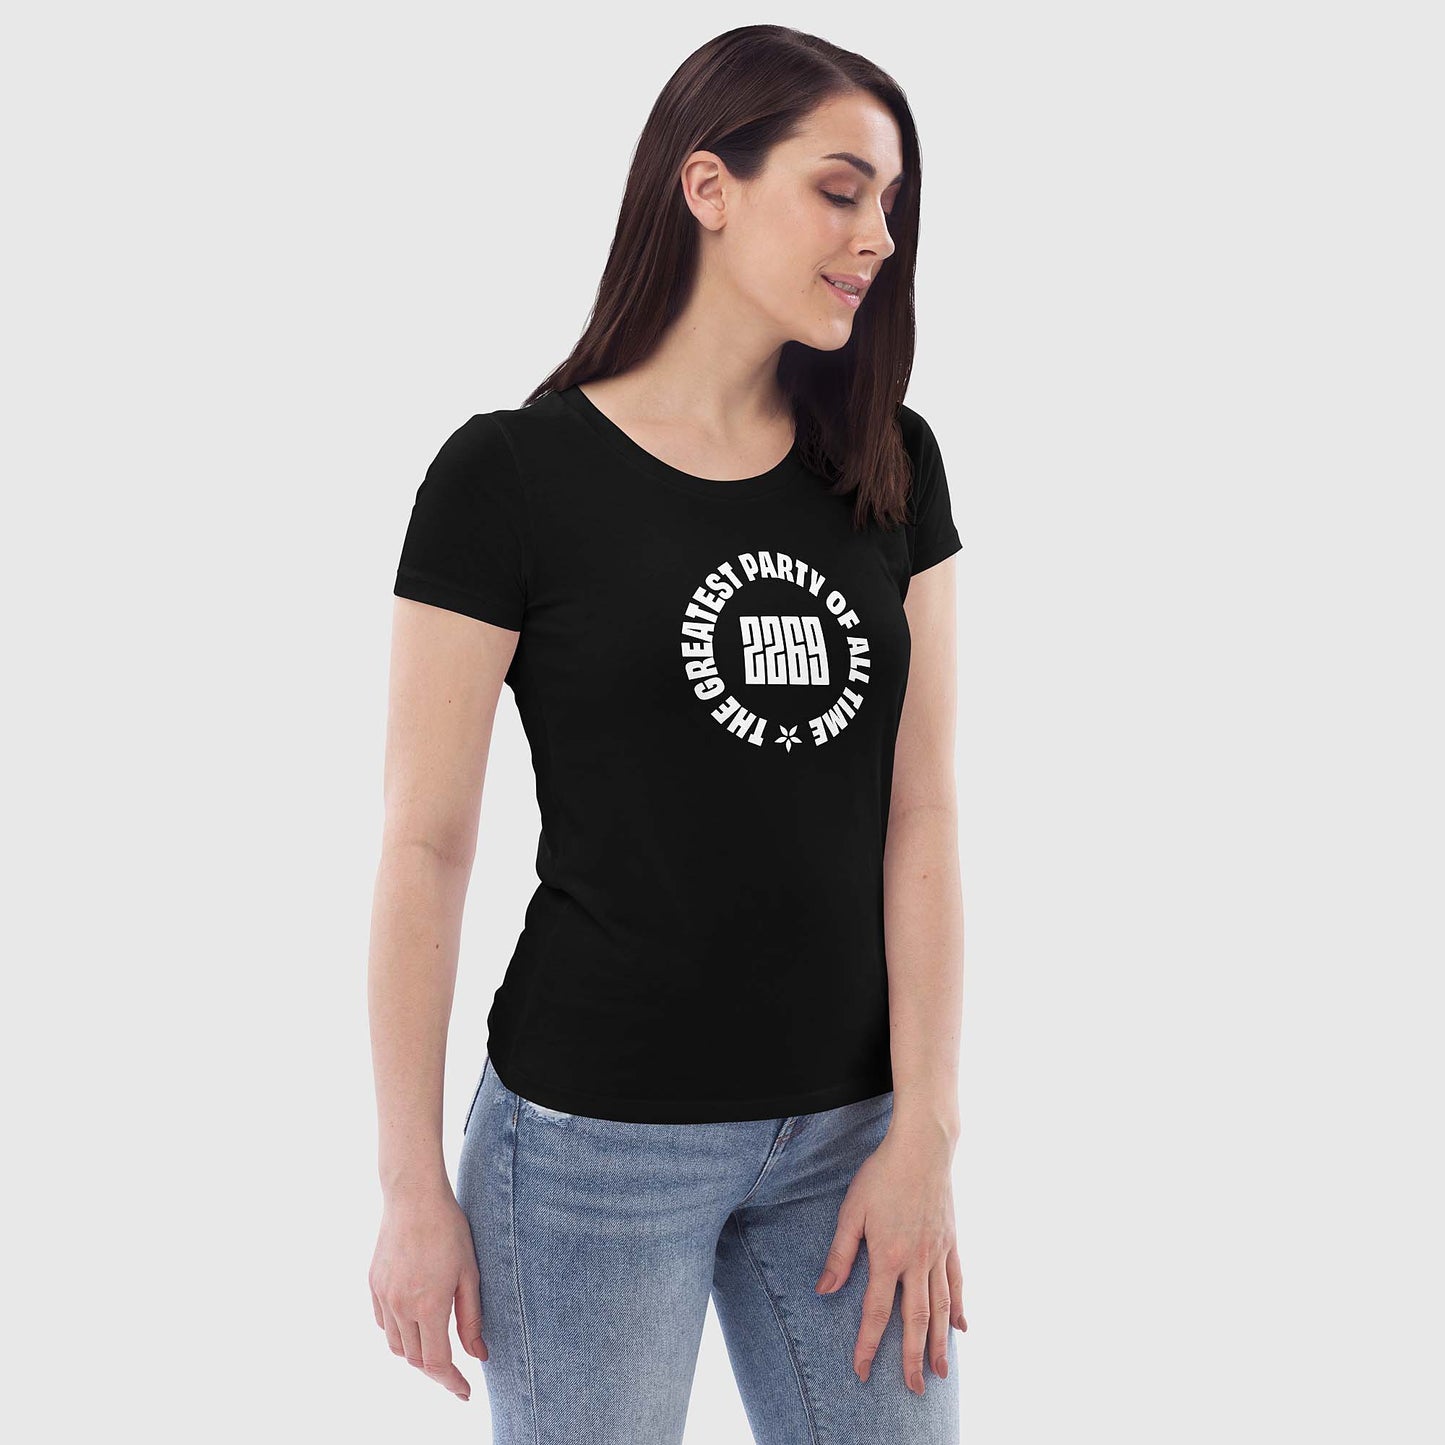 Women's black fitted organic cotton t-shirt with English 2269 party circle